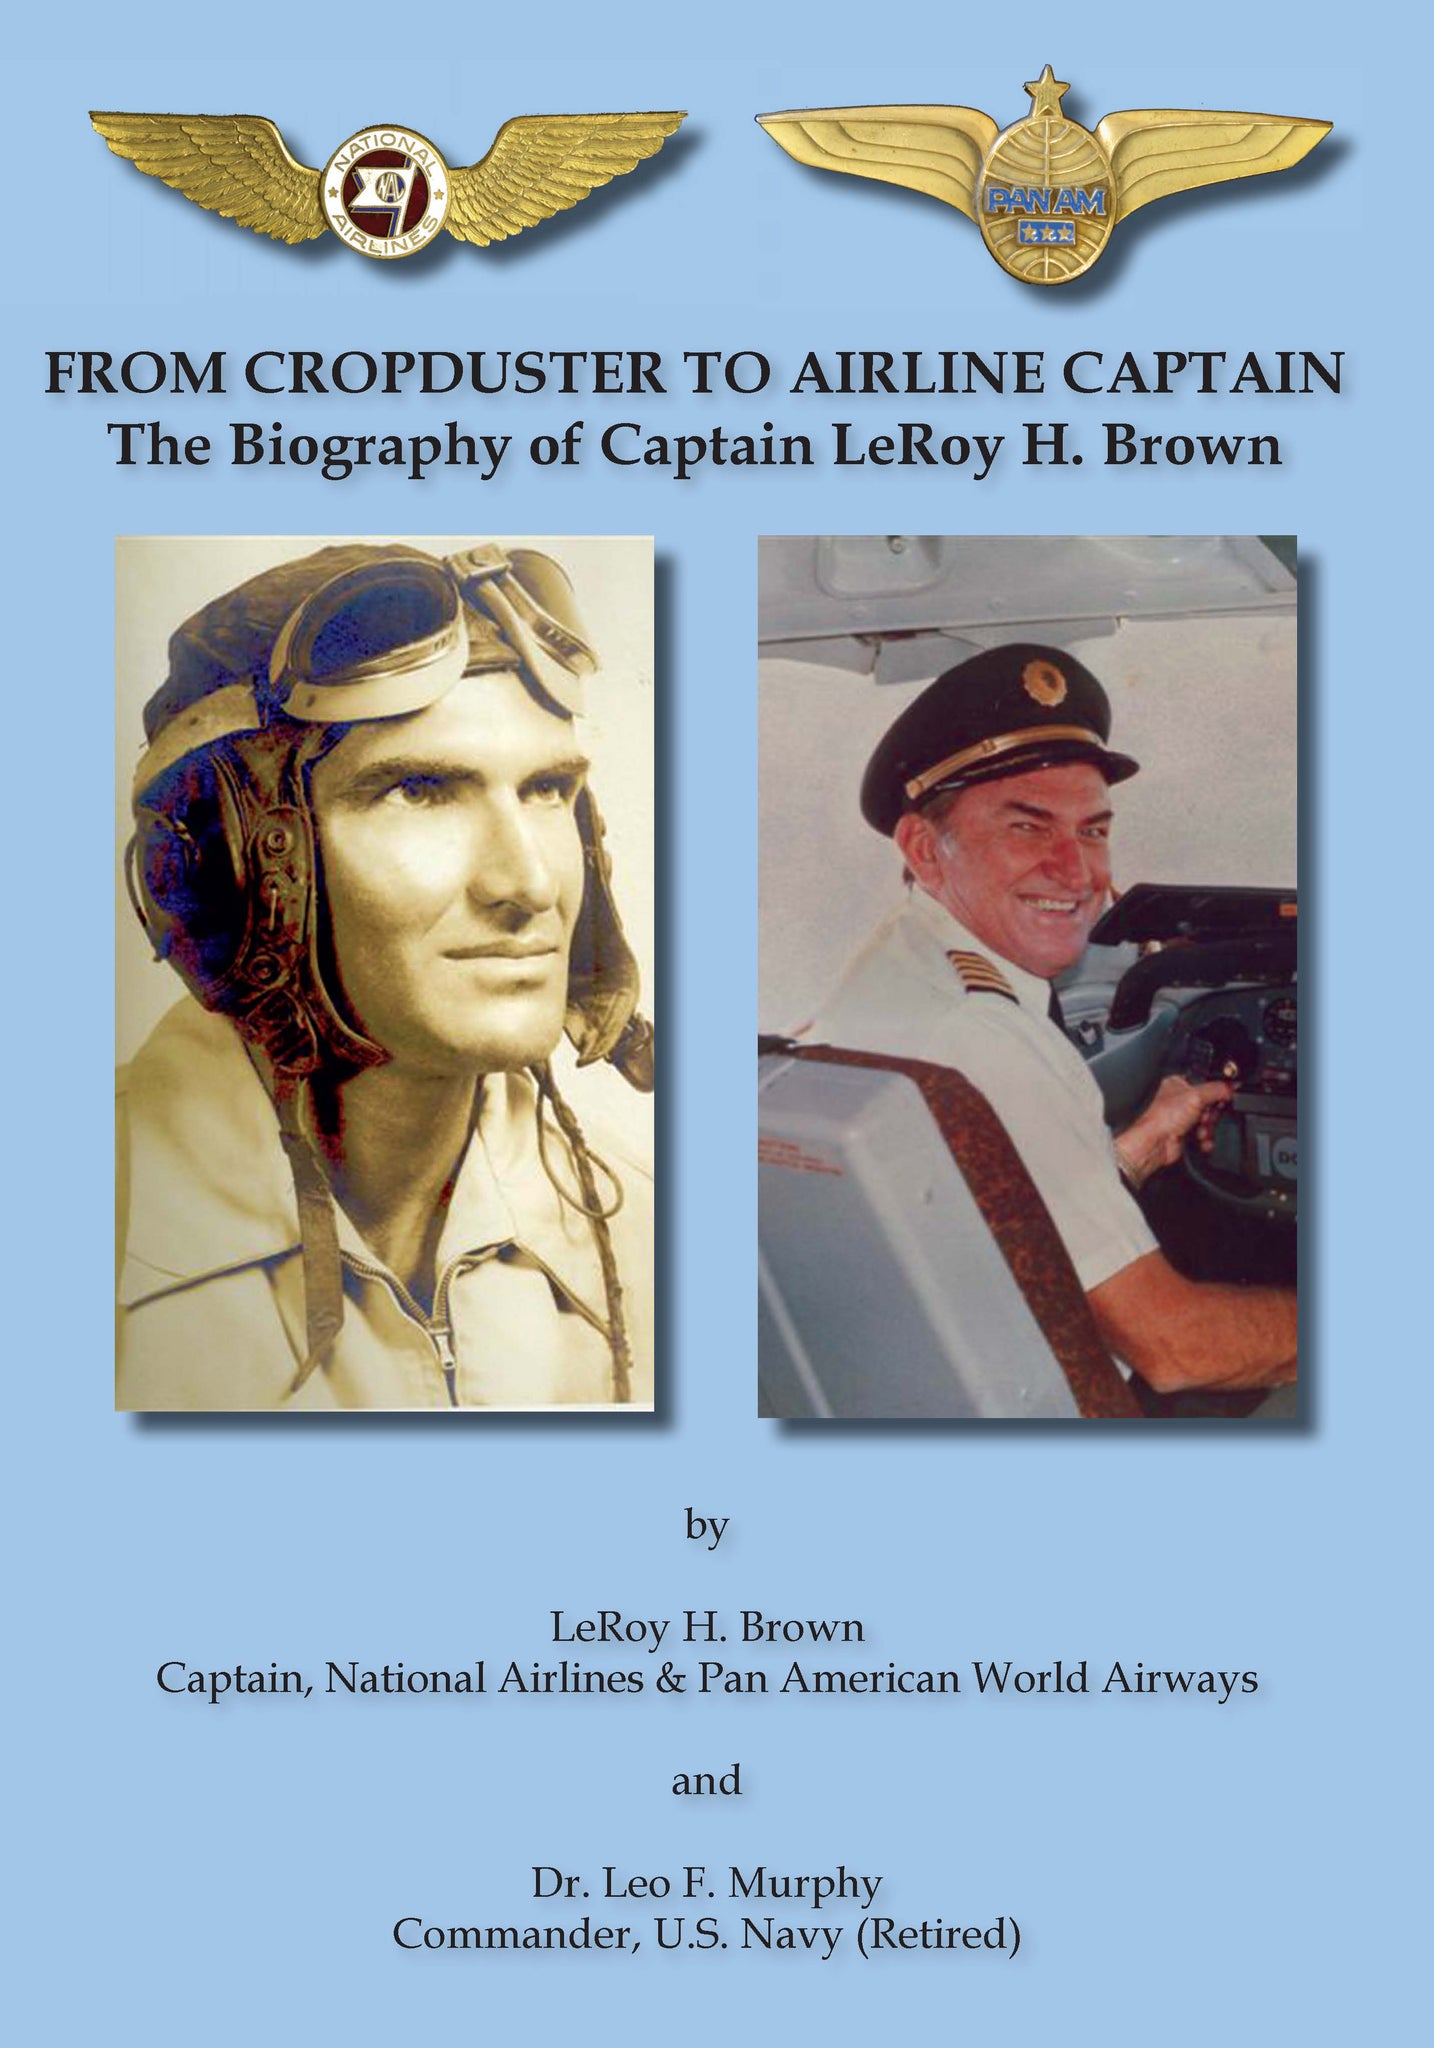 From Cropduster to Airline Captain by LeRoy H. Brown